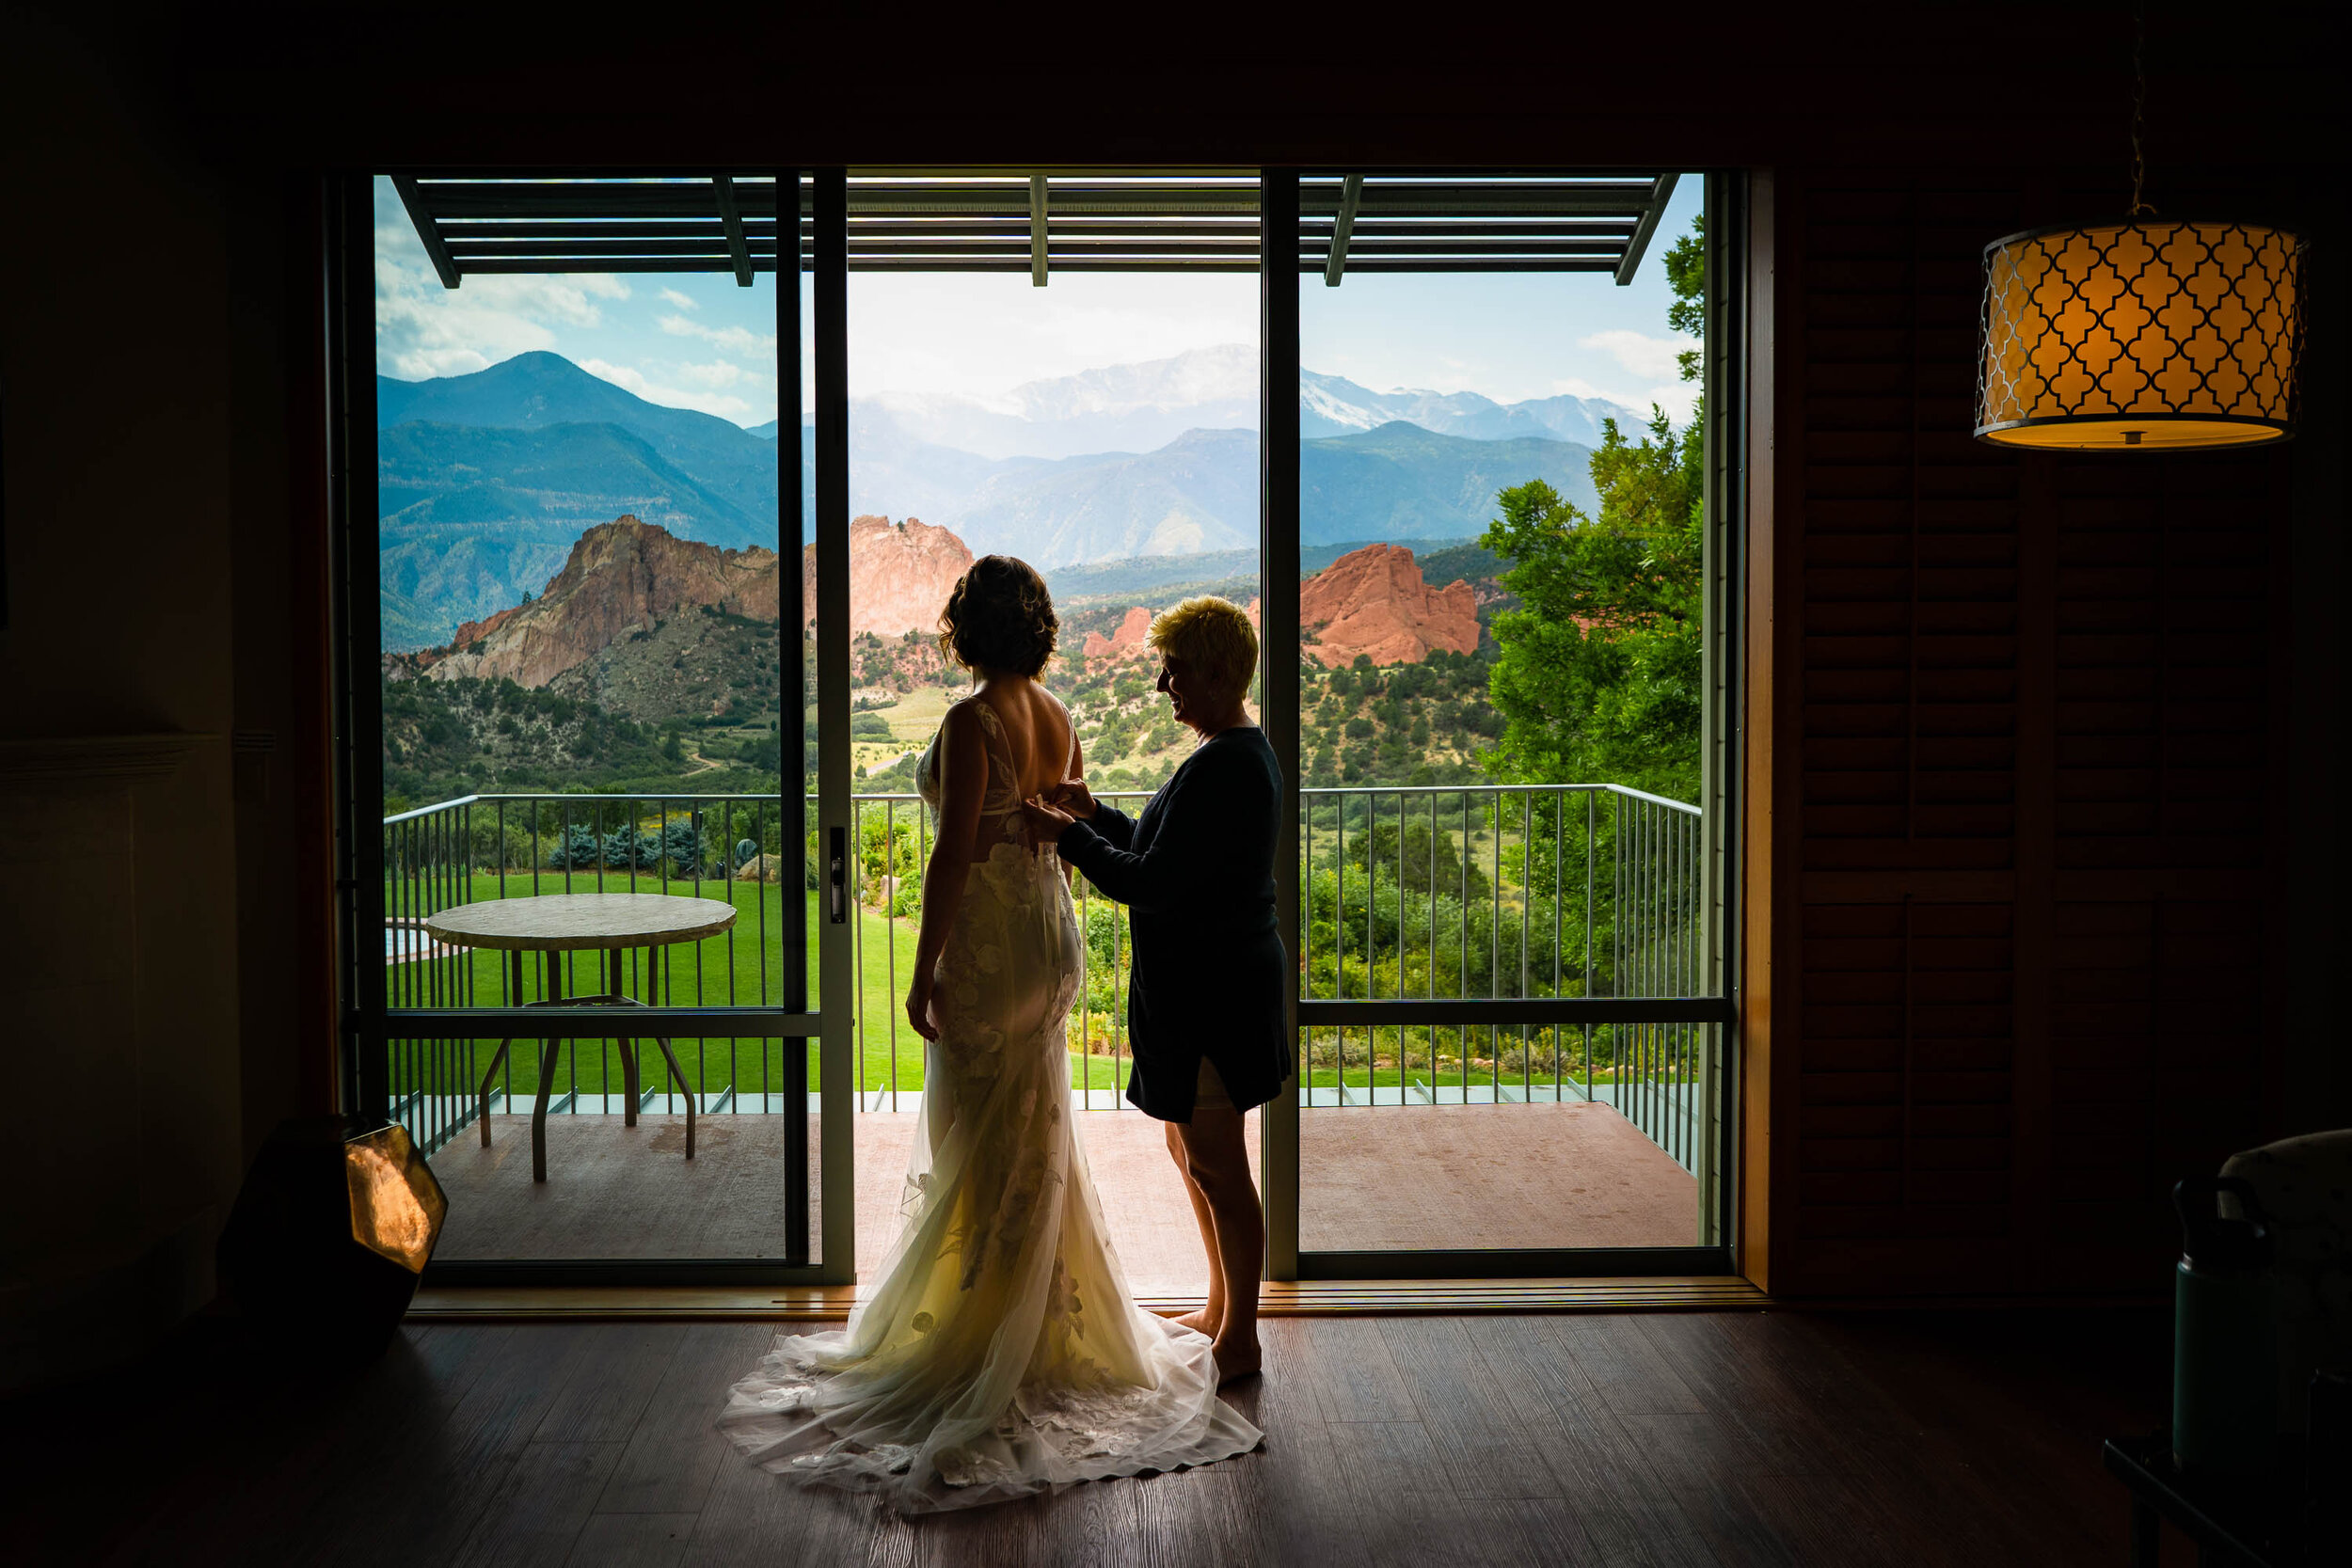 Bride's mom helps her into her wedding gown with the Garden of the Gods Park in the background, wedding photos, wedding photography, wedding photographer, wedding inspiration, wedding photo inspiration, wedding portraits, wedding ceremony, wedding reception, mountain wedding, Garden of the Gods wedding, Garden of the Gods Club & Resort wedding, Garden of the Gods Club & Resort wedding photos, Garden of the Gods Club & Resort wedding photography, Garden of the Gods Club & Resort wedding photographer, Garden of the Gods Club & Resort wedding inspiration, Garden of the Gods Club & Resort wedding venue, Colorado Springs wedding, Colorado Springs wedding photos,  Colorado Springs wedding photography, Colorado Springs wedding photographer, Colorado wedding, Colorado wedding photos, Colorado wedding photography, Colorado wedding photographer, Colorado mountain wedding, Colorado wedding inspiration